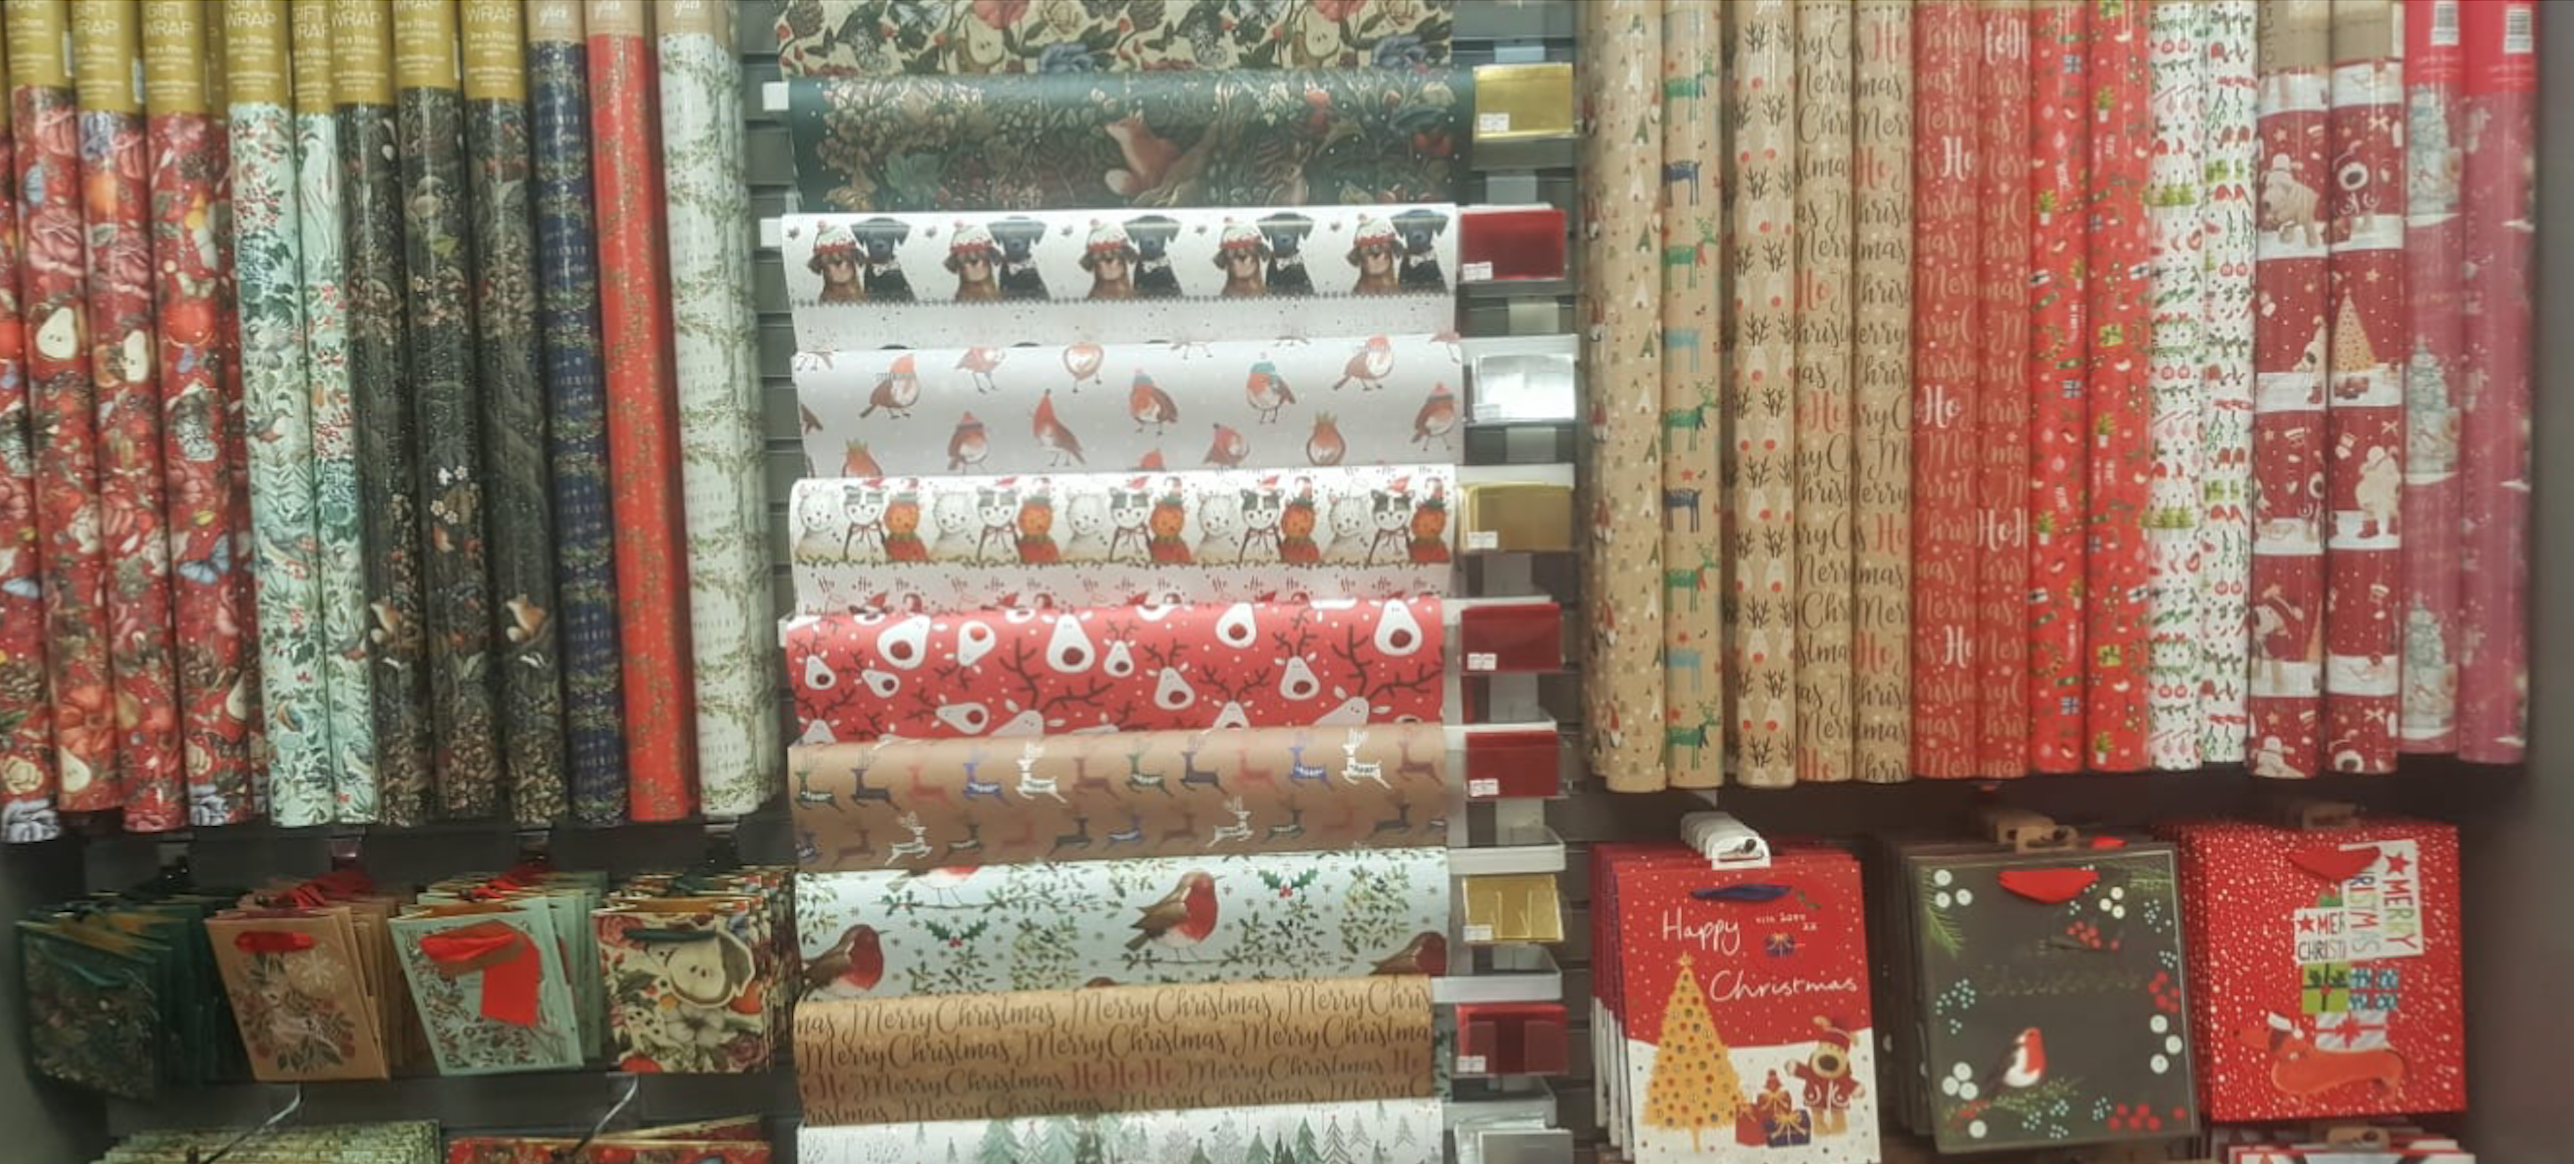 Above: Part of the giftwrap display in Reflections.